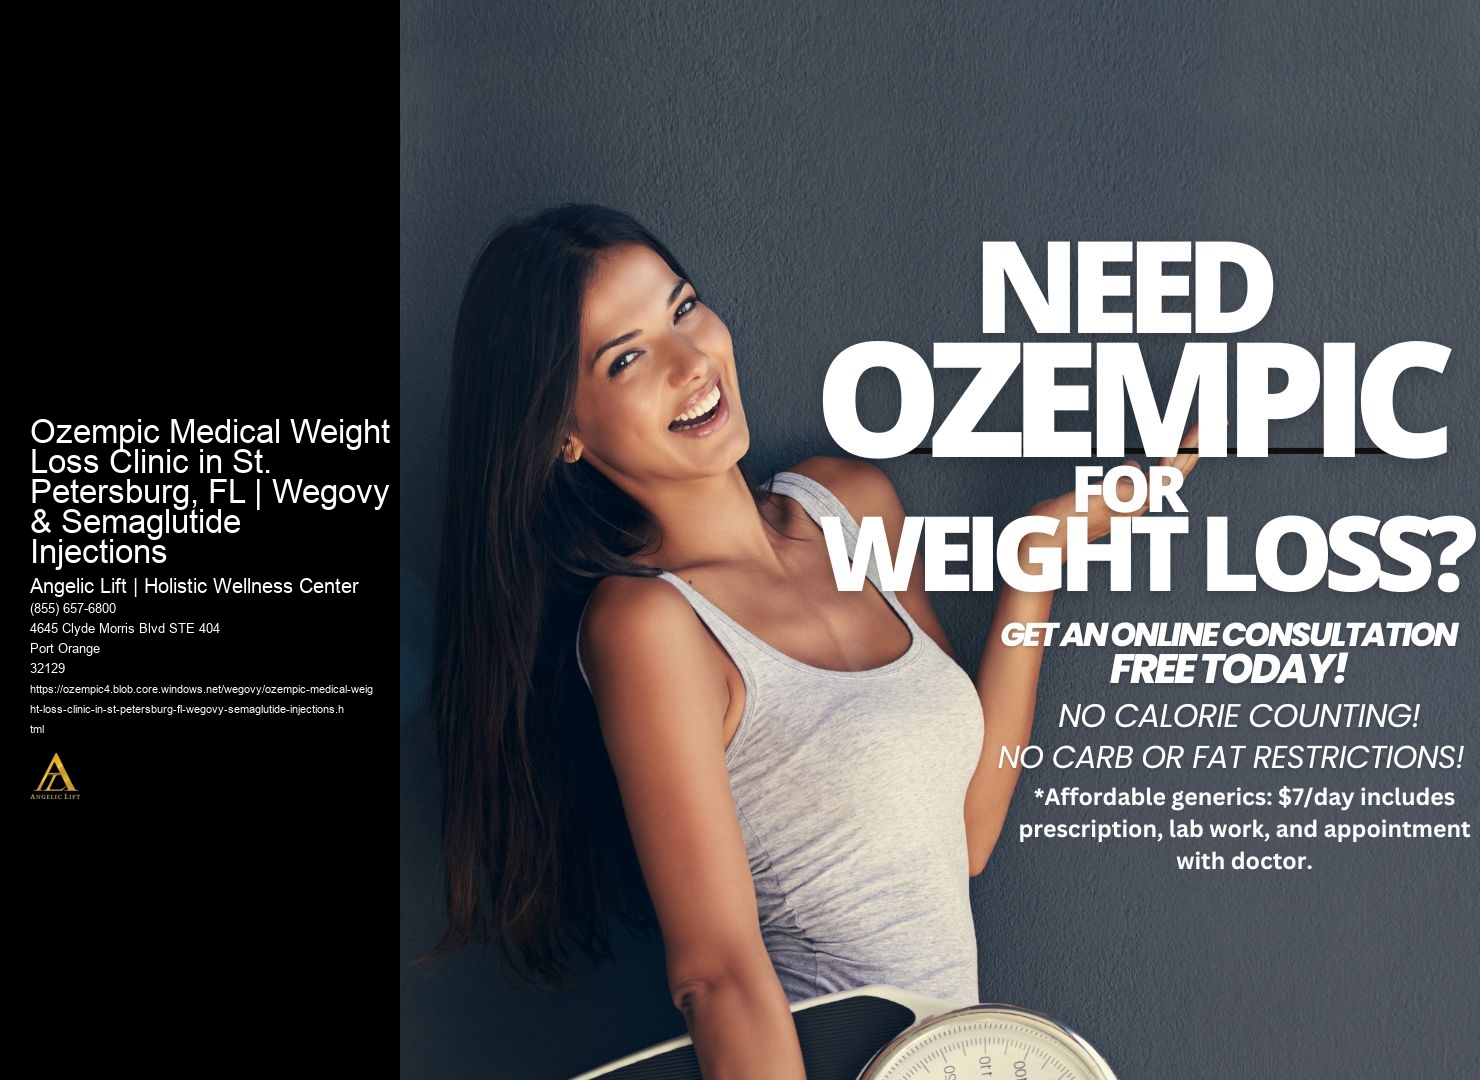 Ozempic Medical Weight Loss Clinic in St. Petersburg, FL | Wegovy & Semaglutide Injections